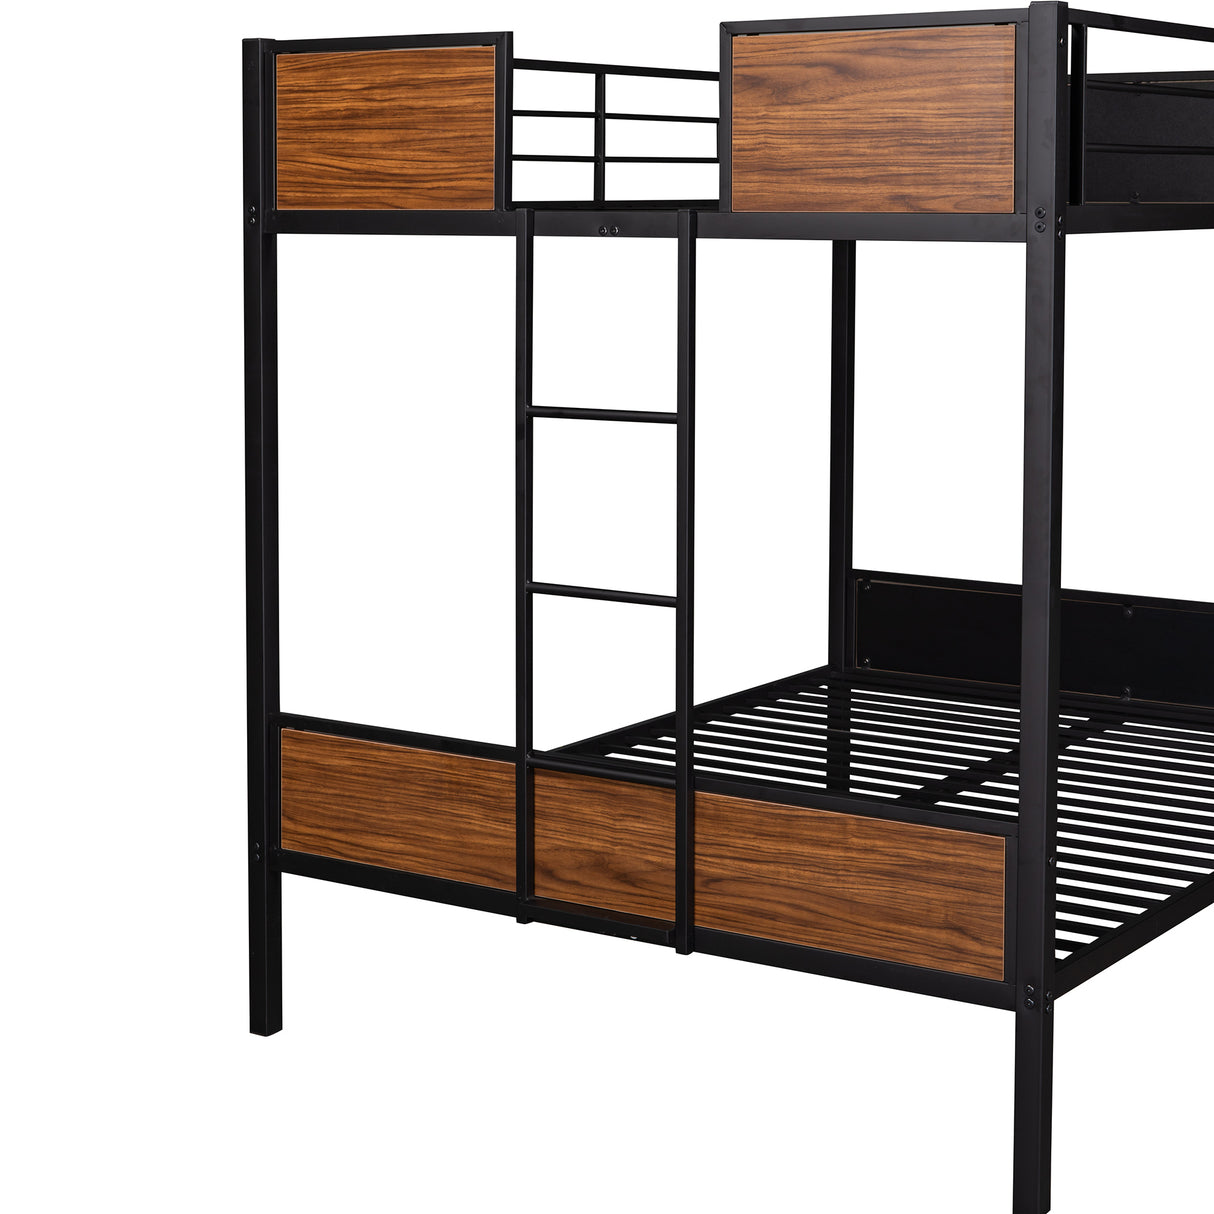 Full-over-full bunk bed modern style steel frame bunk bed with safety rail, built-in ladder for bedroom, dorm, boys, girls, adults(OLD SKU: MF190840AAD) - Home Elegance USA